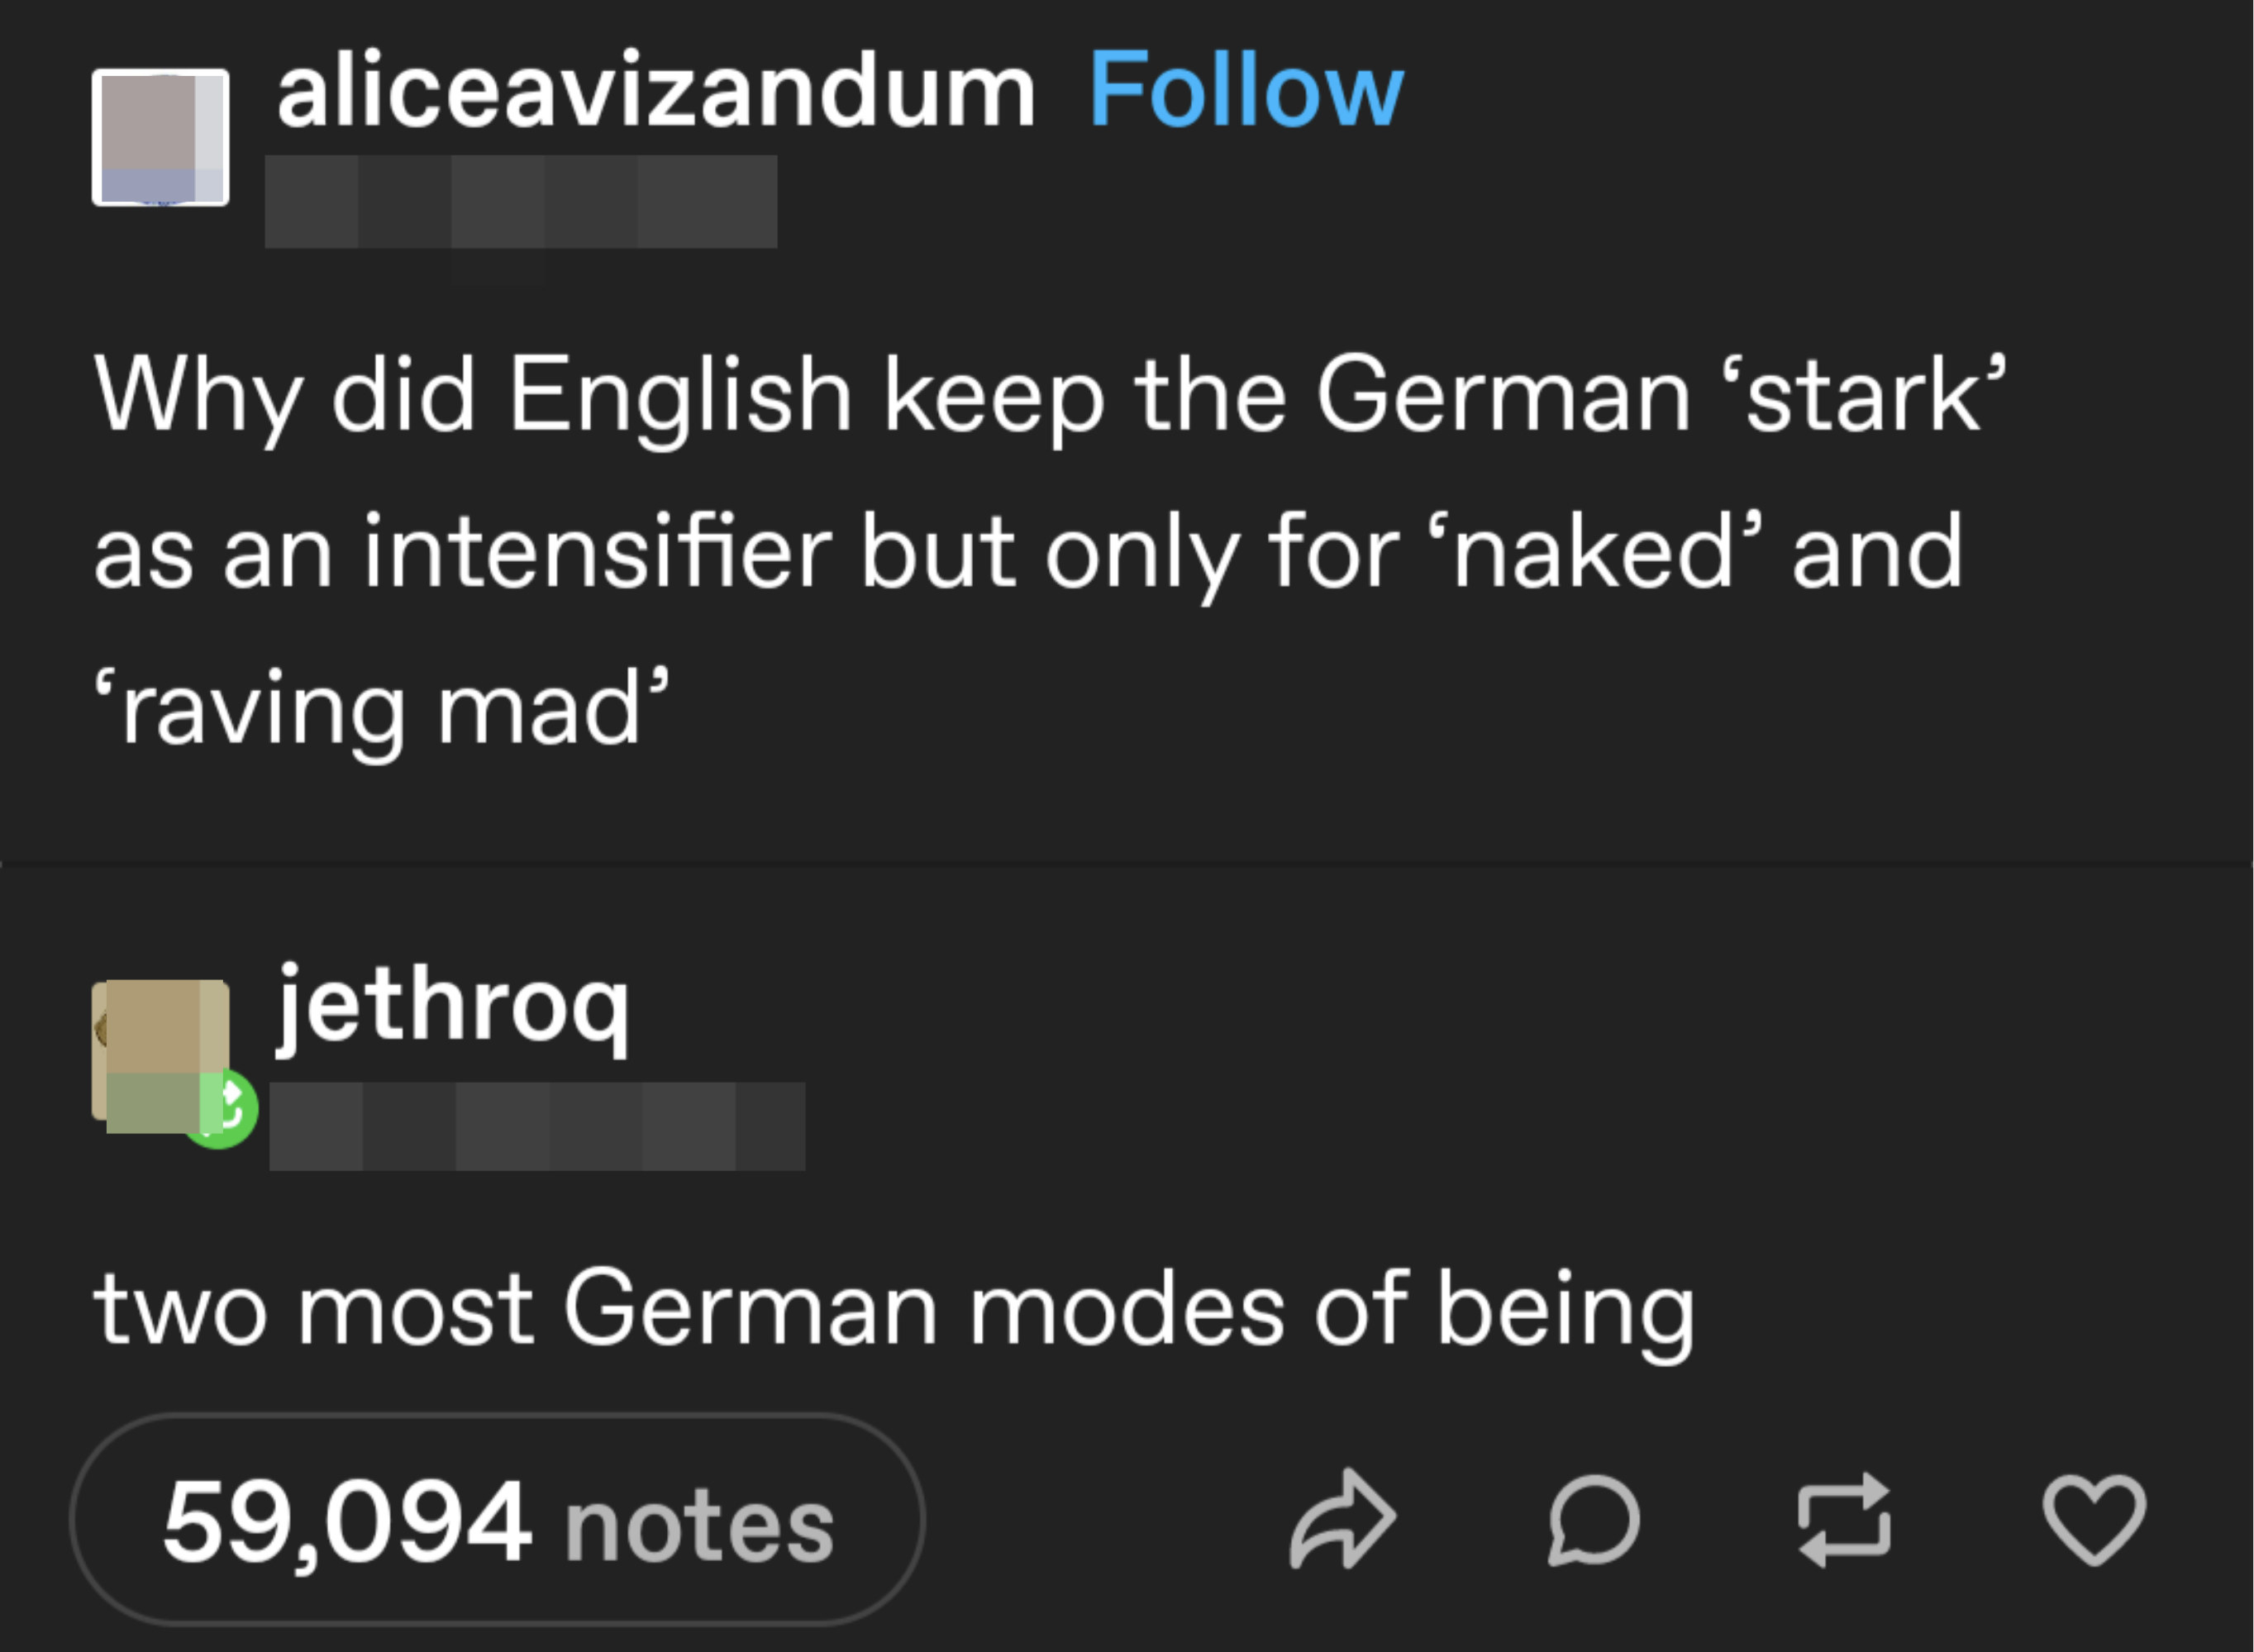 &quot;Why did English keep the German &#x27;stark&#x27; as an intensifier but only for &#x27;naked&#x27; and &#x27;raving mad&#x27;?&quot; &quot;Two most German modes of being&quot;